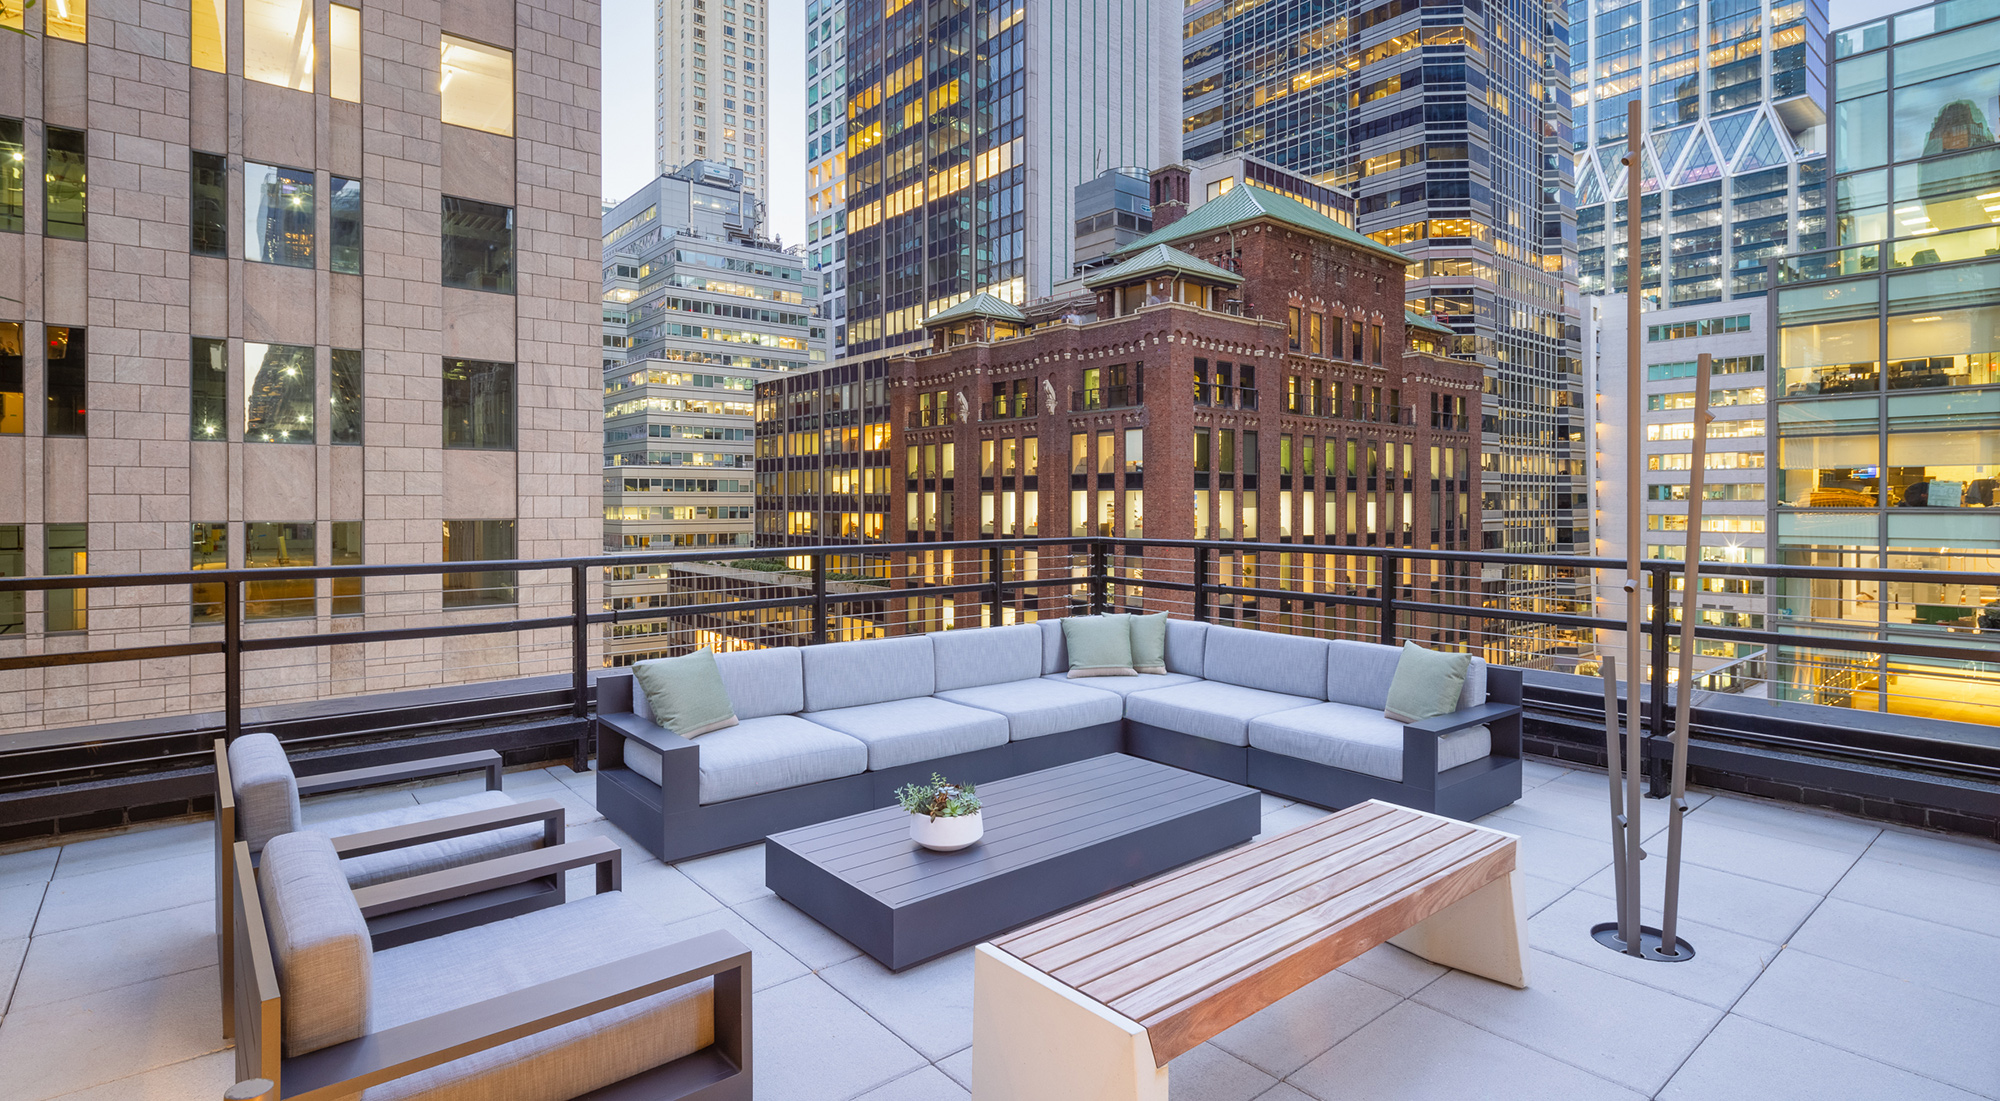 A stunning city terrace that overlooks the buzzing Plaza district